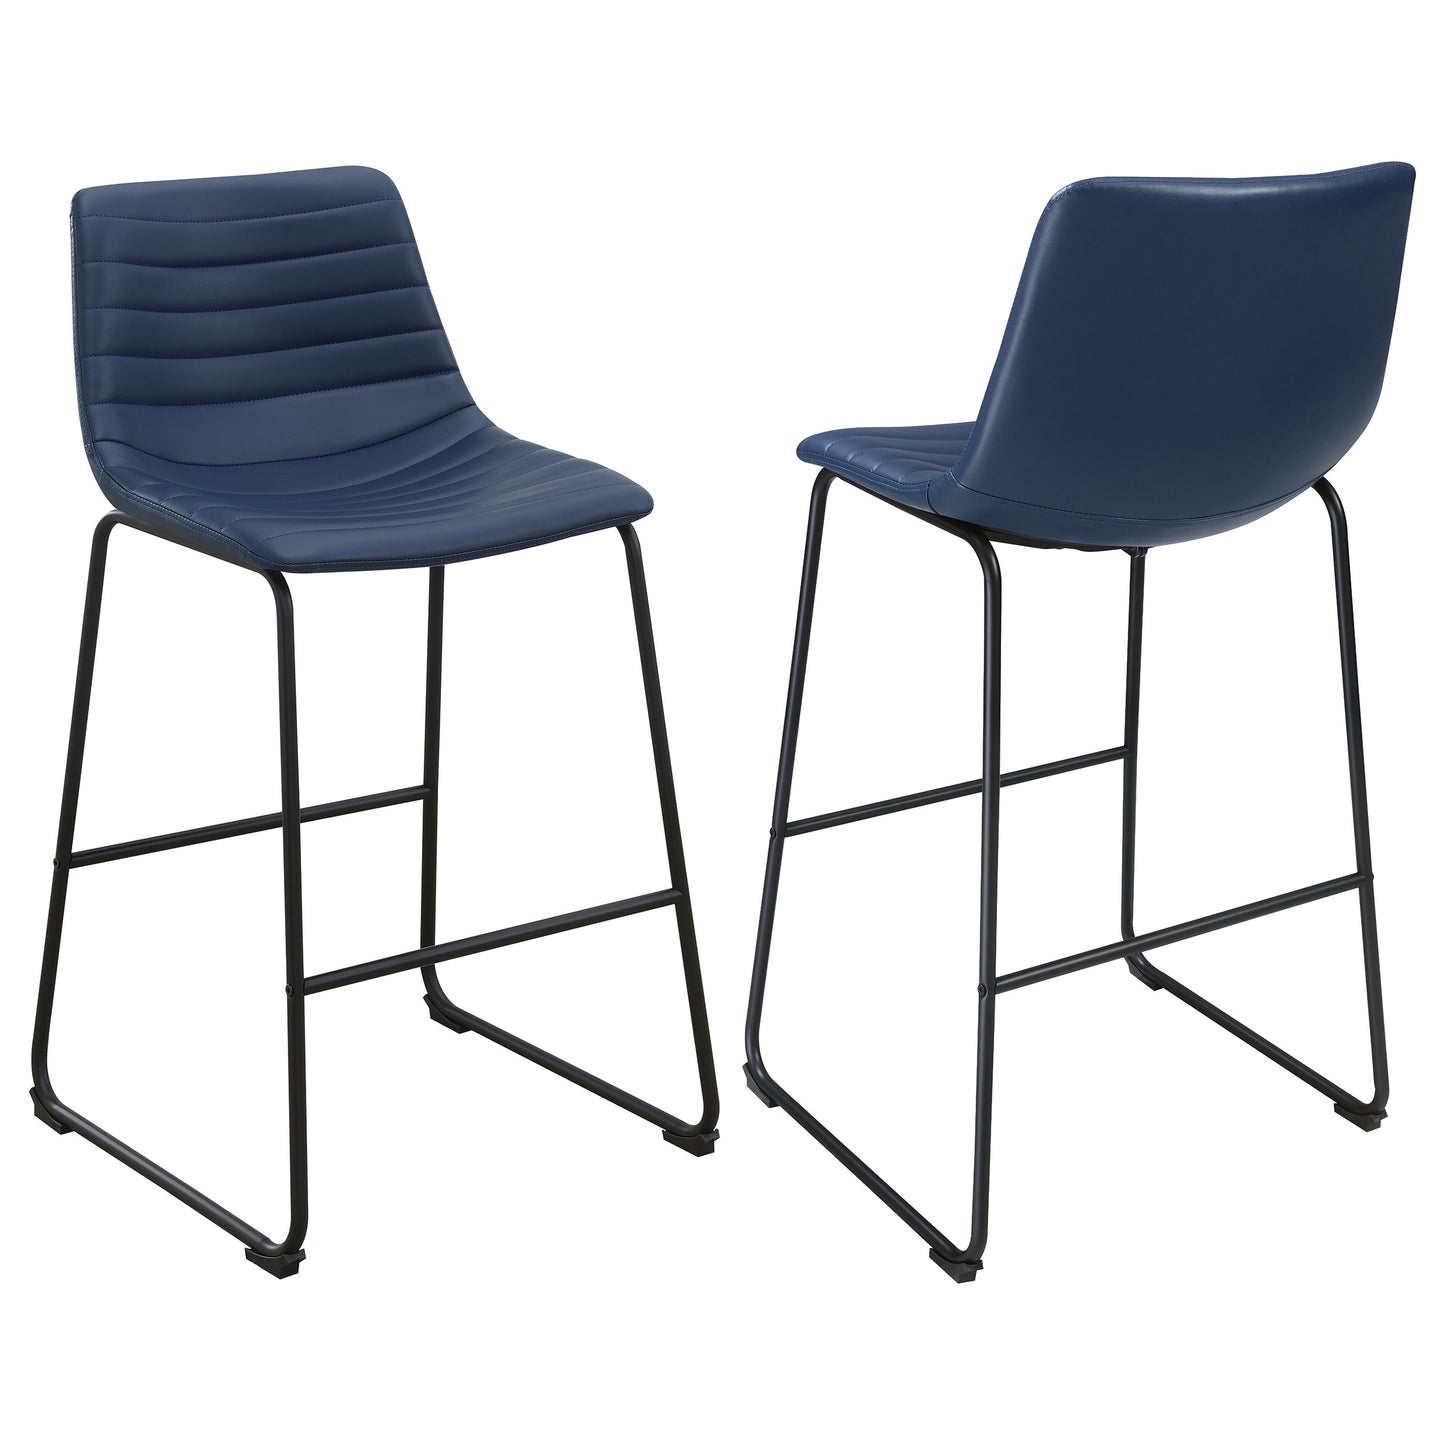 Zuni Faux Leather Upholstered Counter Chair Blue (Set of 2)